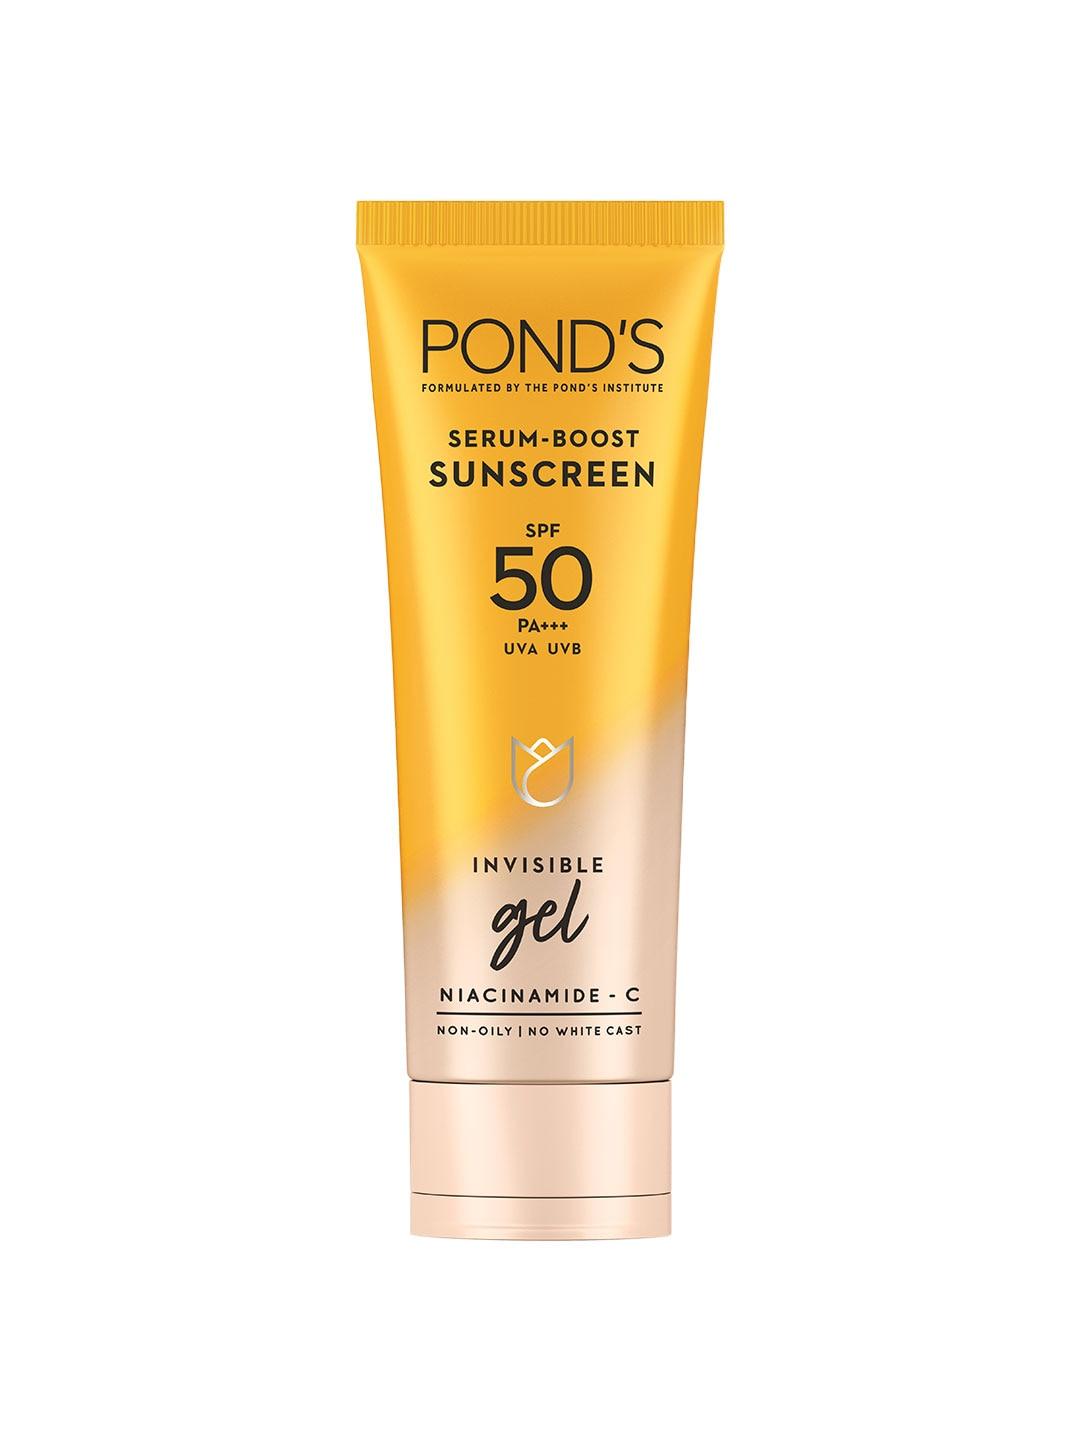 ponds-spf-50-pa++-uva-uvb-serum-boost-invisible-gel-sunscreen-with-niacinamide-c---50-g